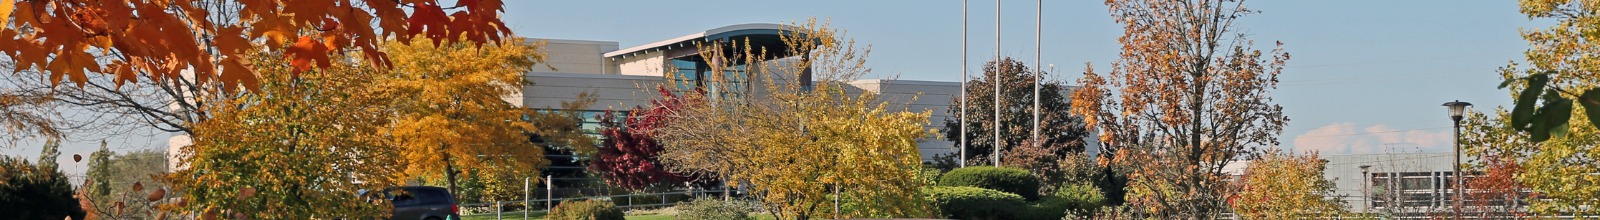 An exterior of a large building in the fall